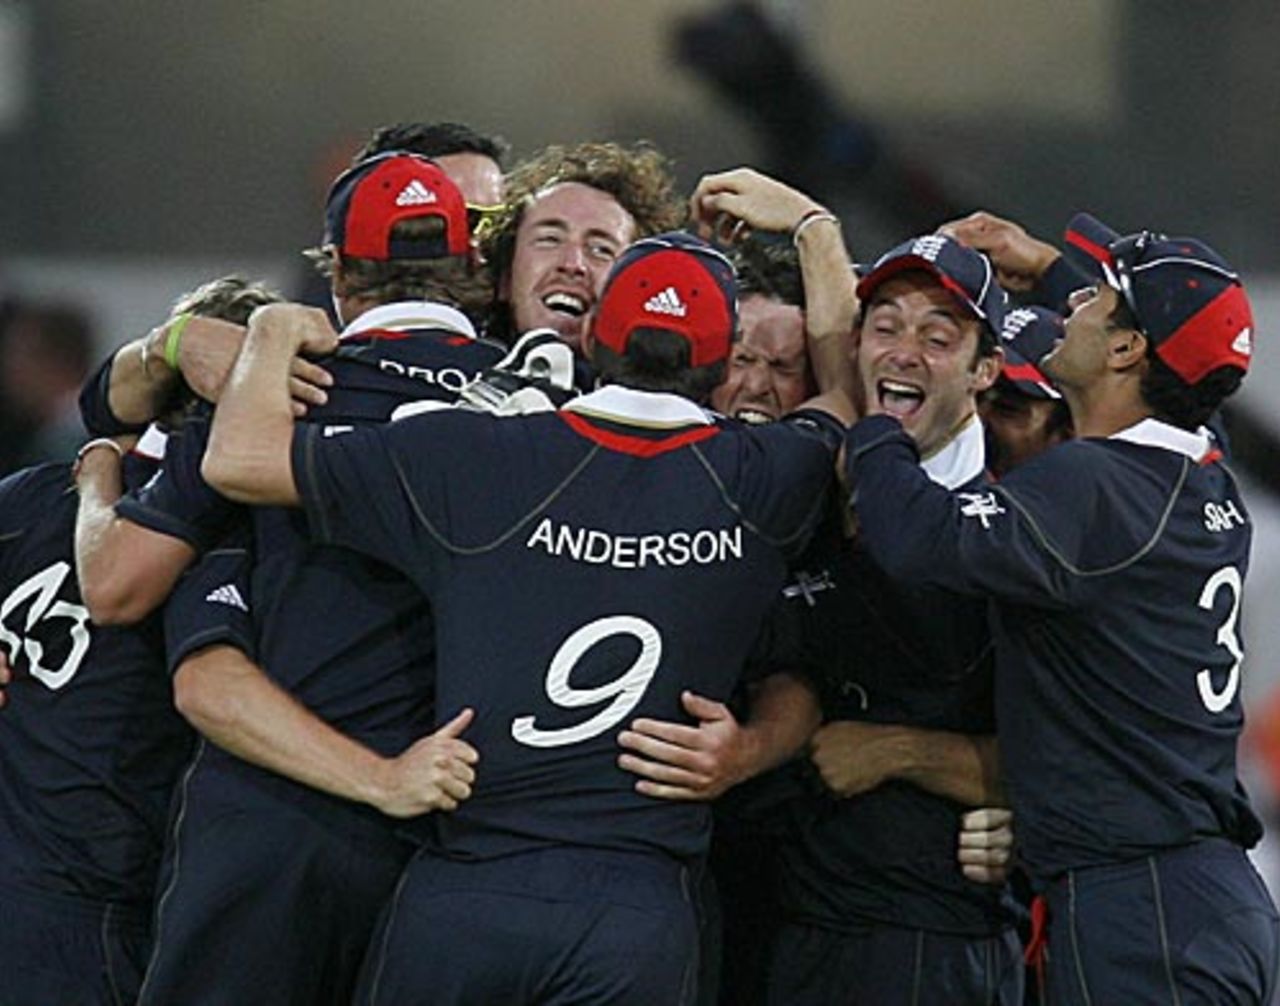 England celebrate their win, England v India, ICC World Twenty20 Super Eights, Lord's, June 14, 2009 